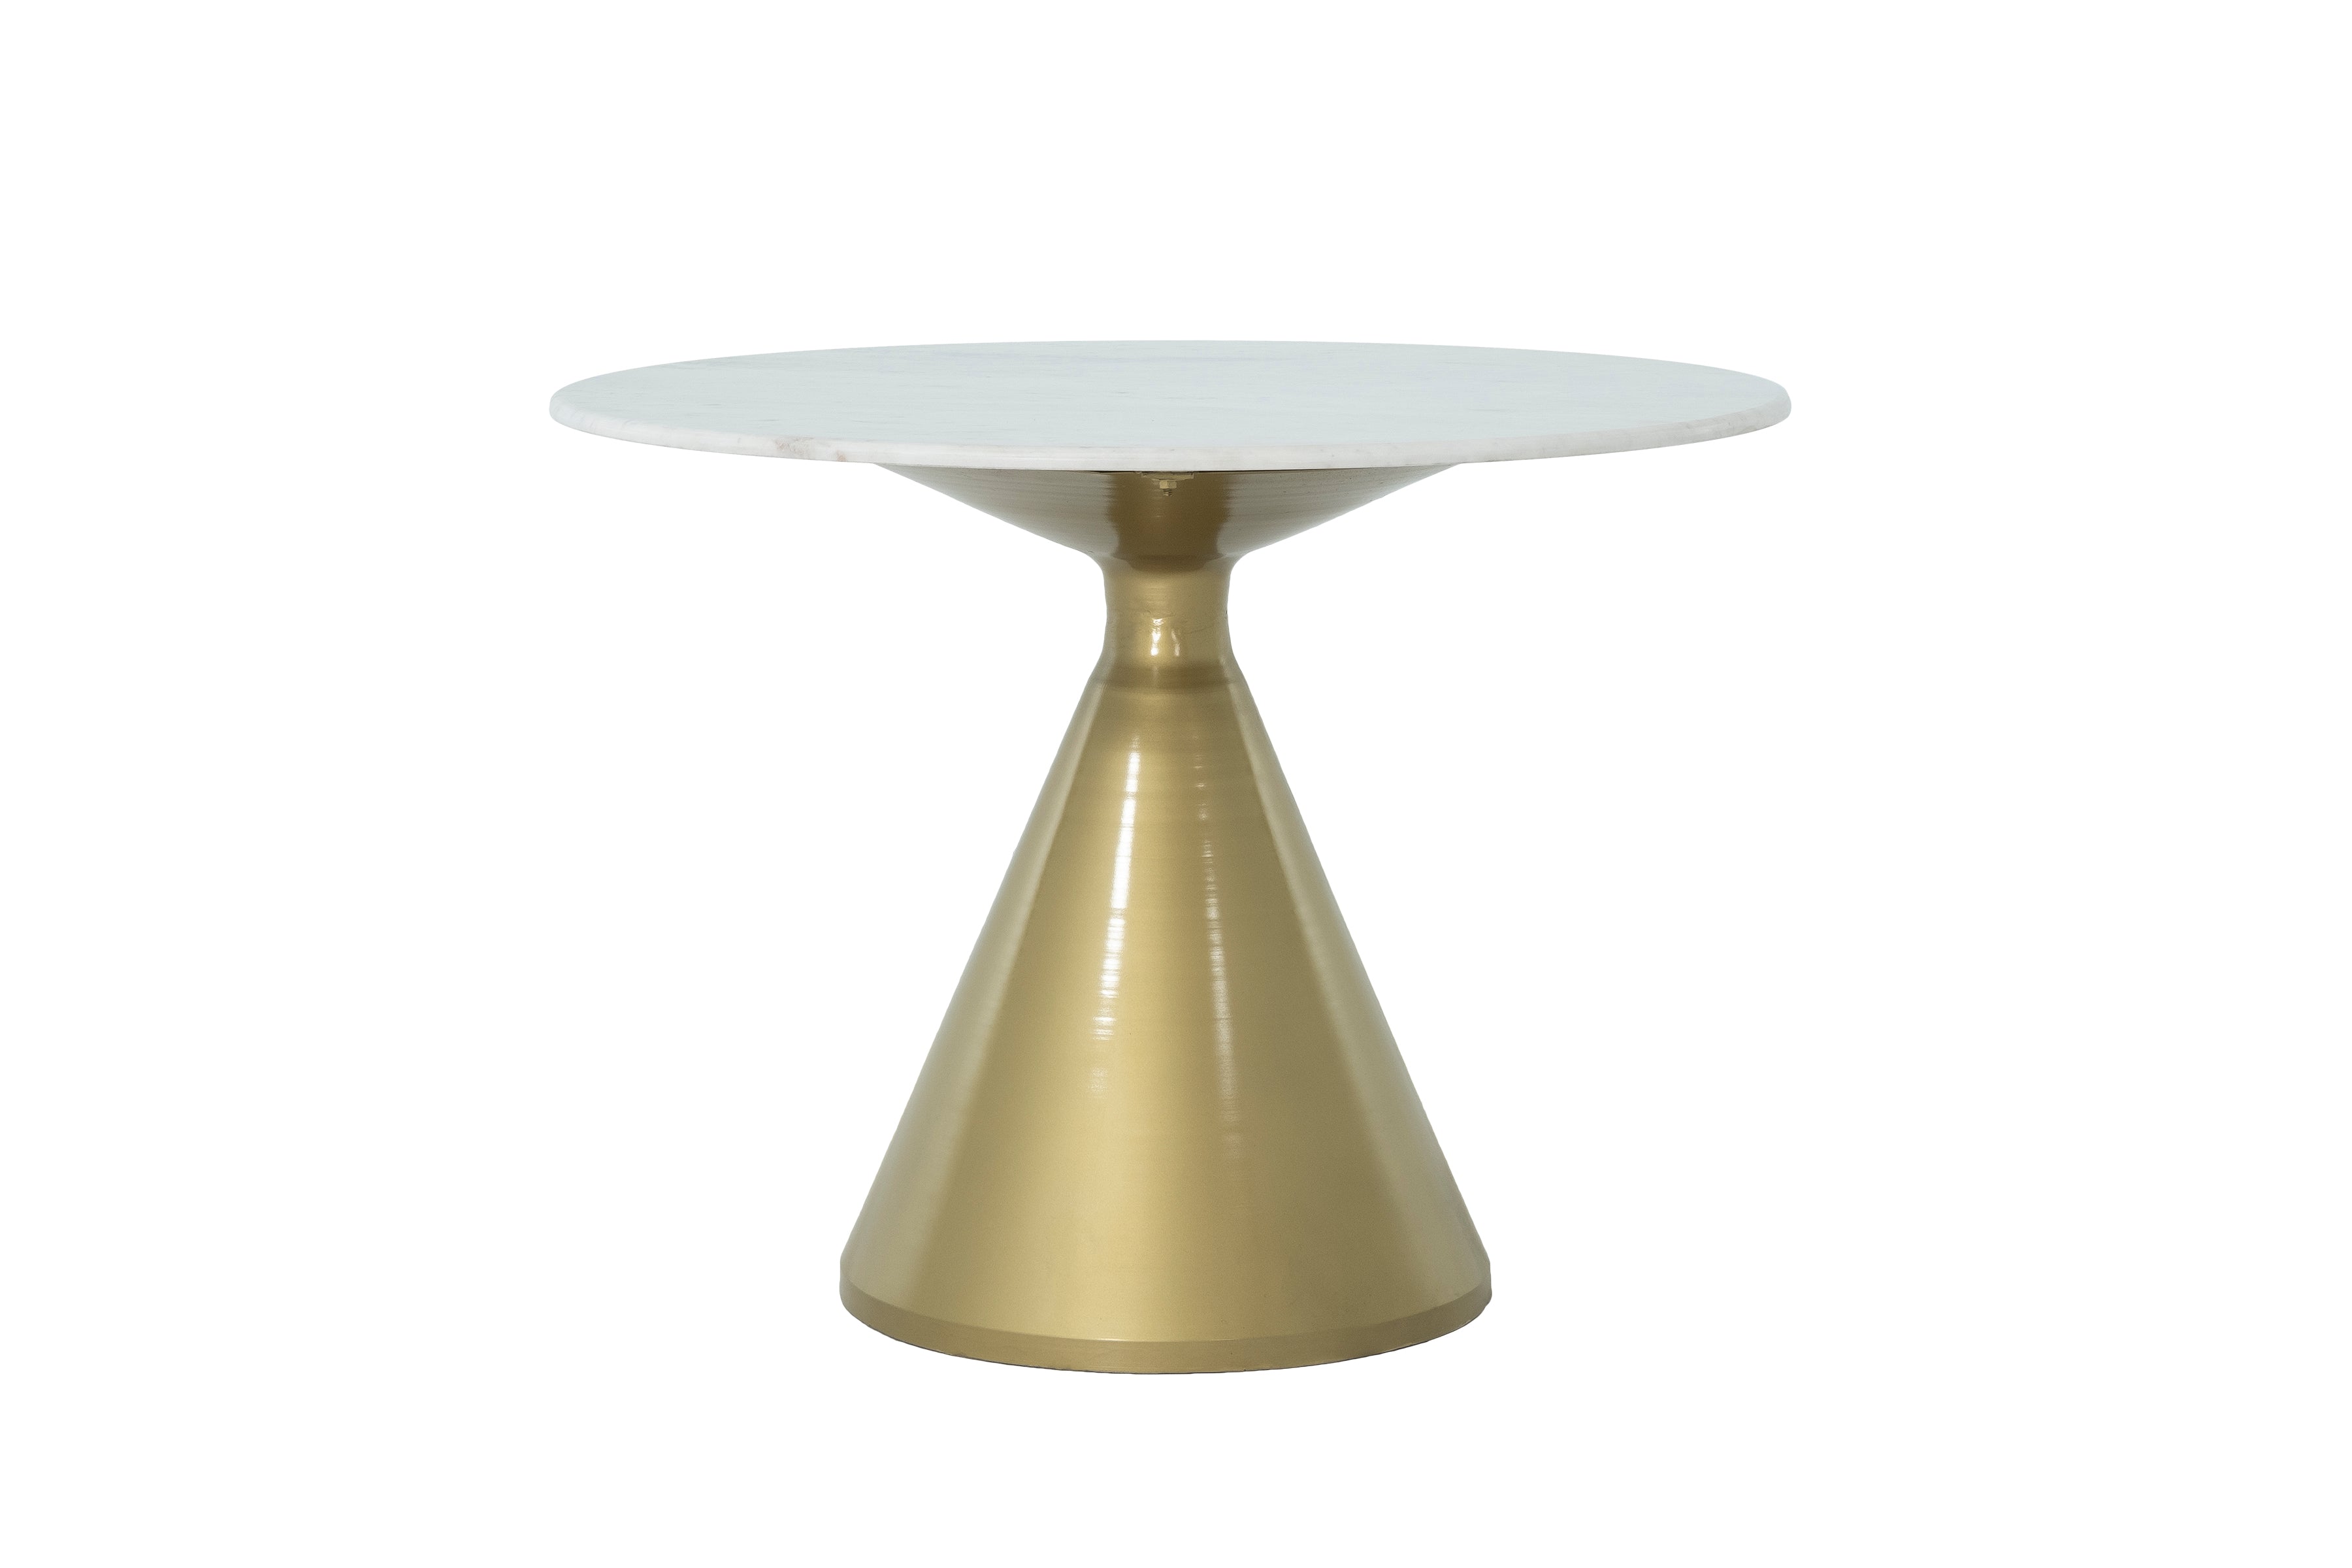 Silhouette Pedestal Marble Top Round Dining Table W/ Gold Base